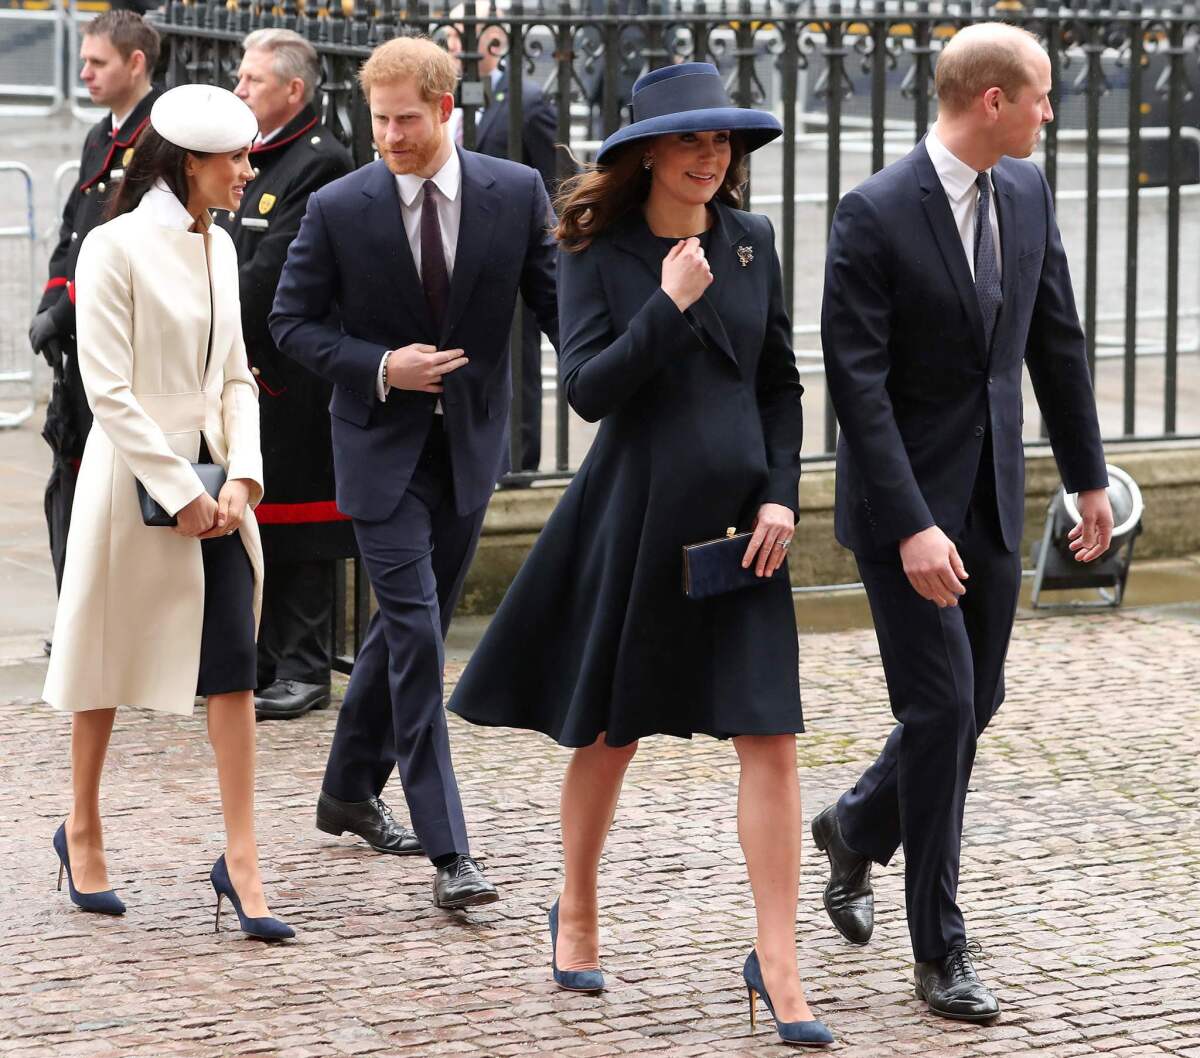 Catherine, Duchess of Cambridge, and her husband, Prince William, Duke of Cambridge, front left, arrive with Prince Harry and Meghan Markle to attend a Commonwealth Day Service.